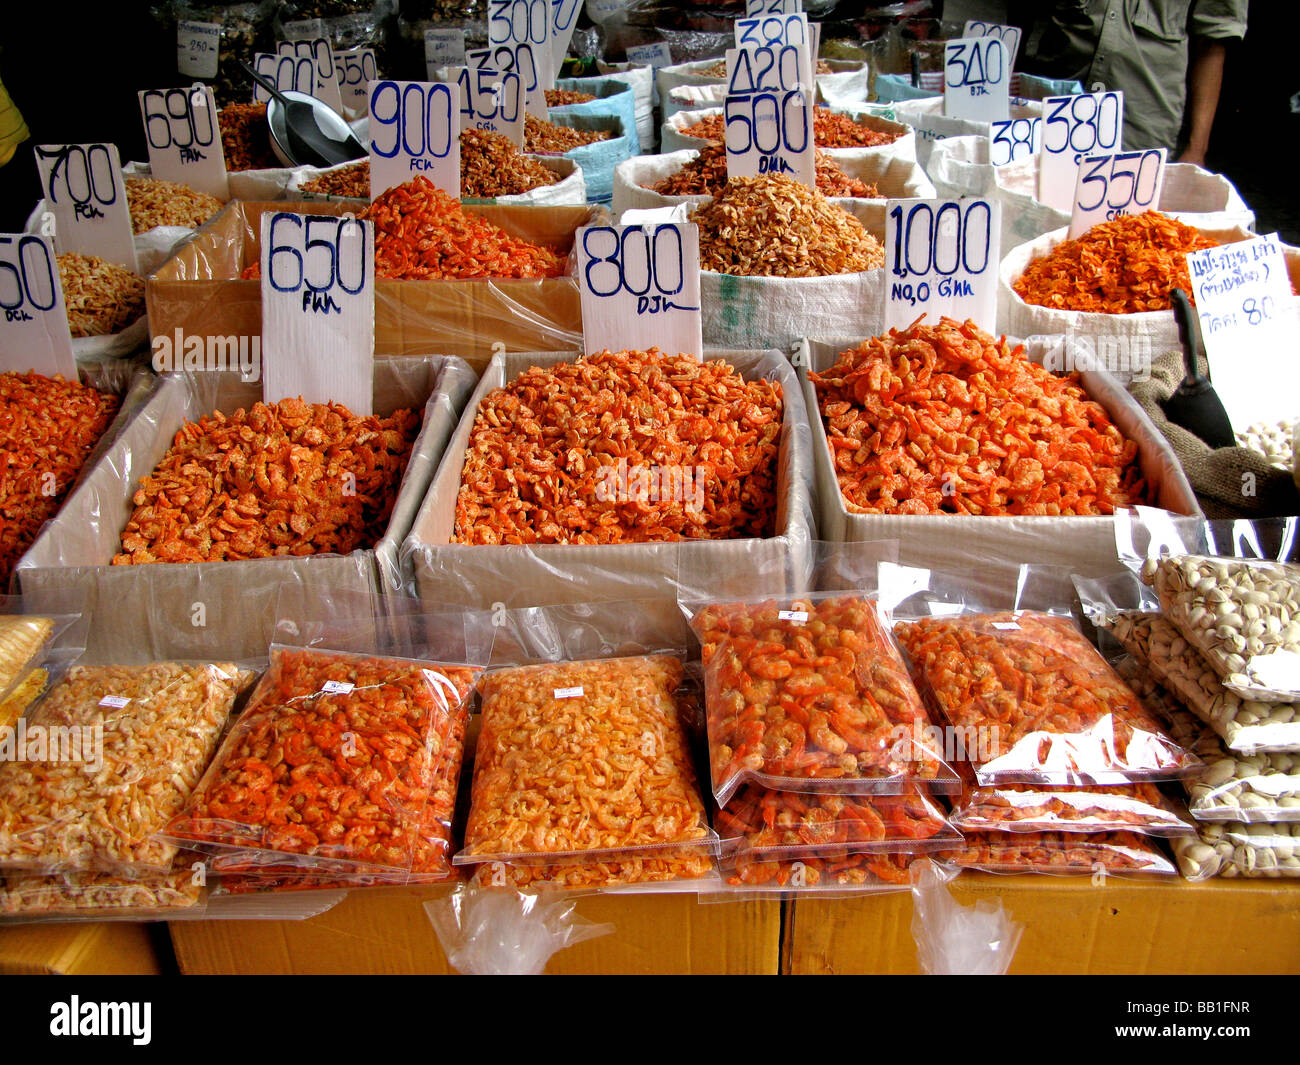 Market stall selling dried food Thailand Stock Photo